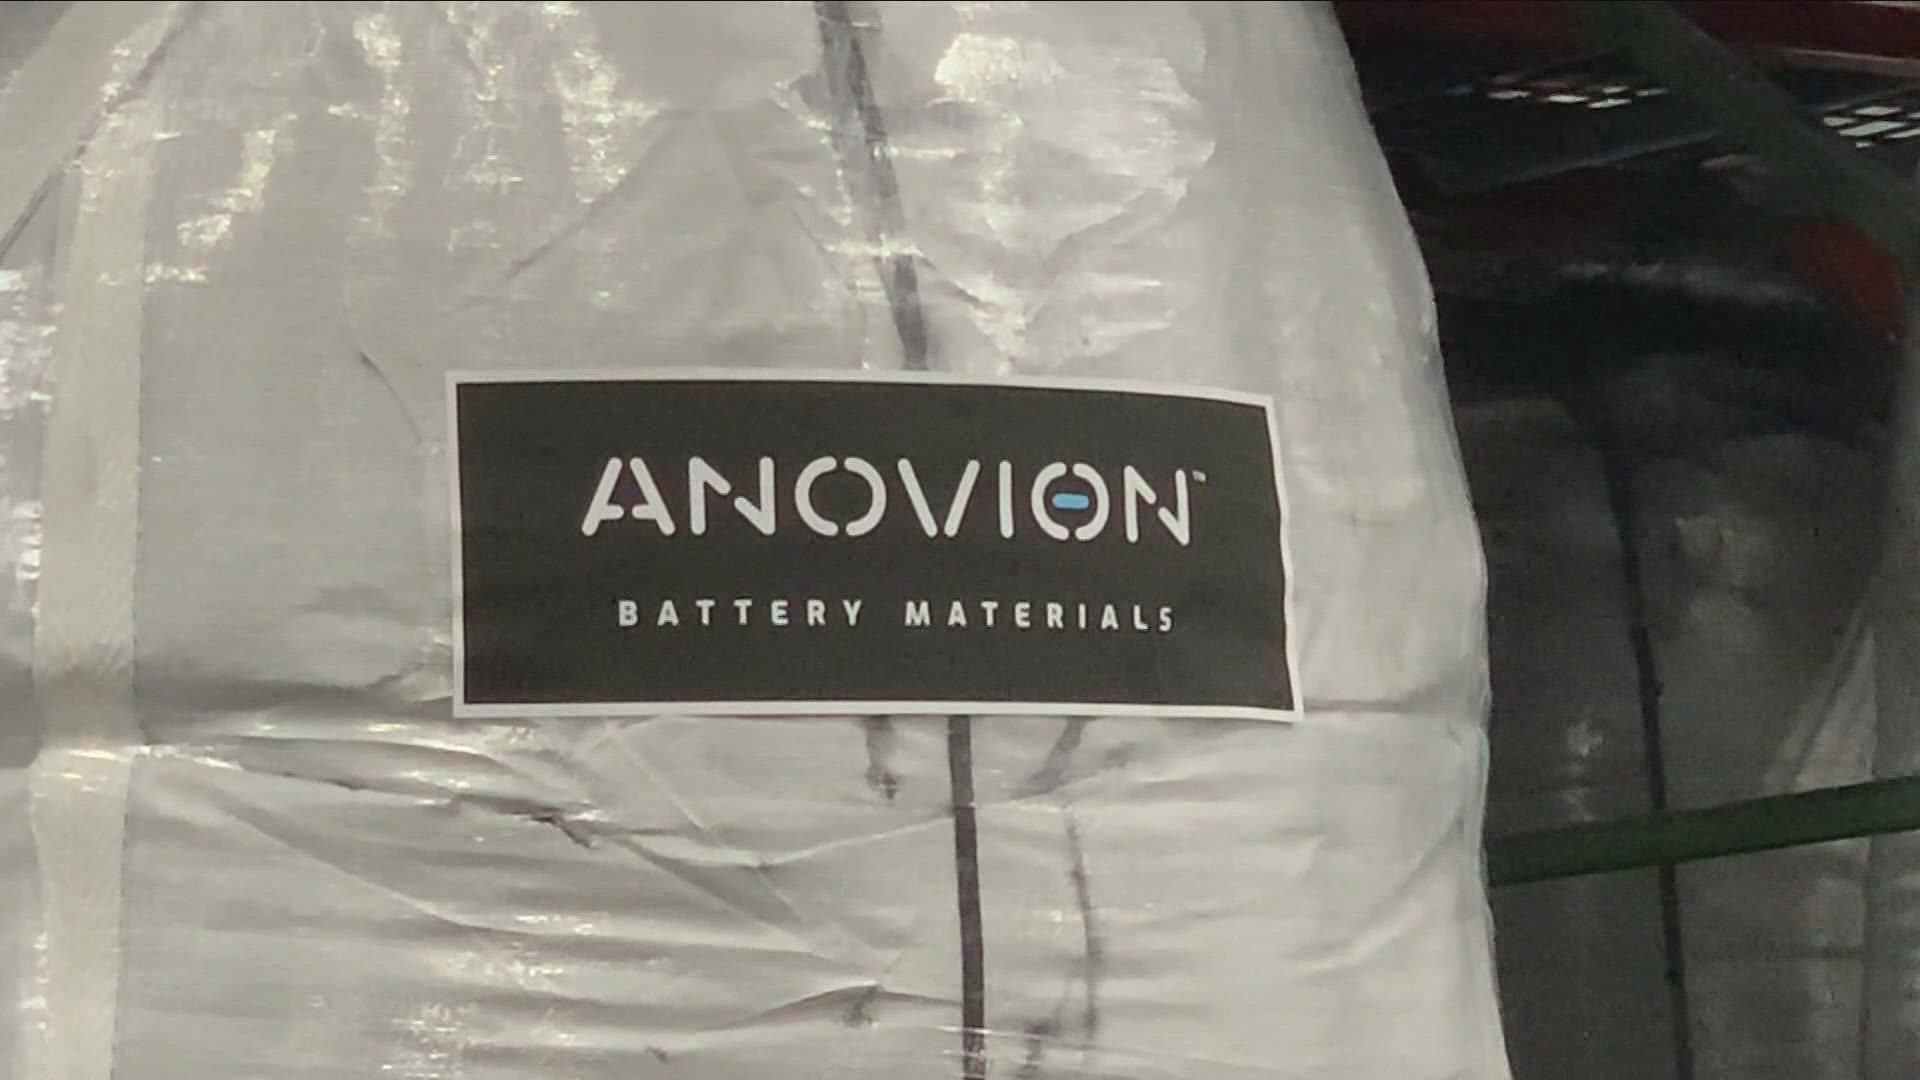 Anovion Battery Materials will receive $117 million to help increase its capacity in creating mineral synthetic graphite for electric car batteries.